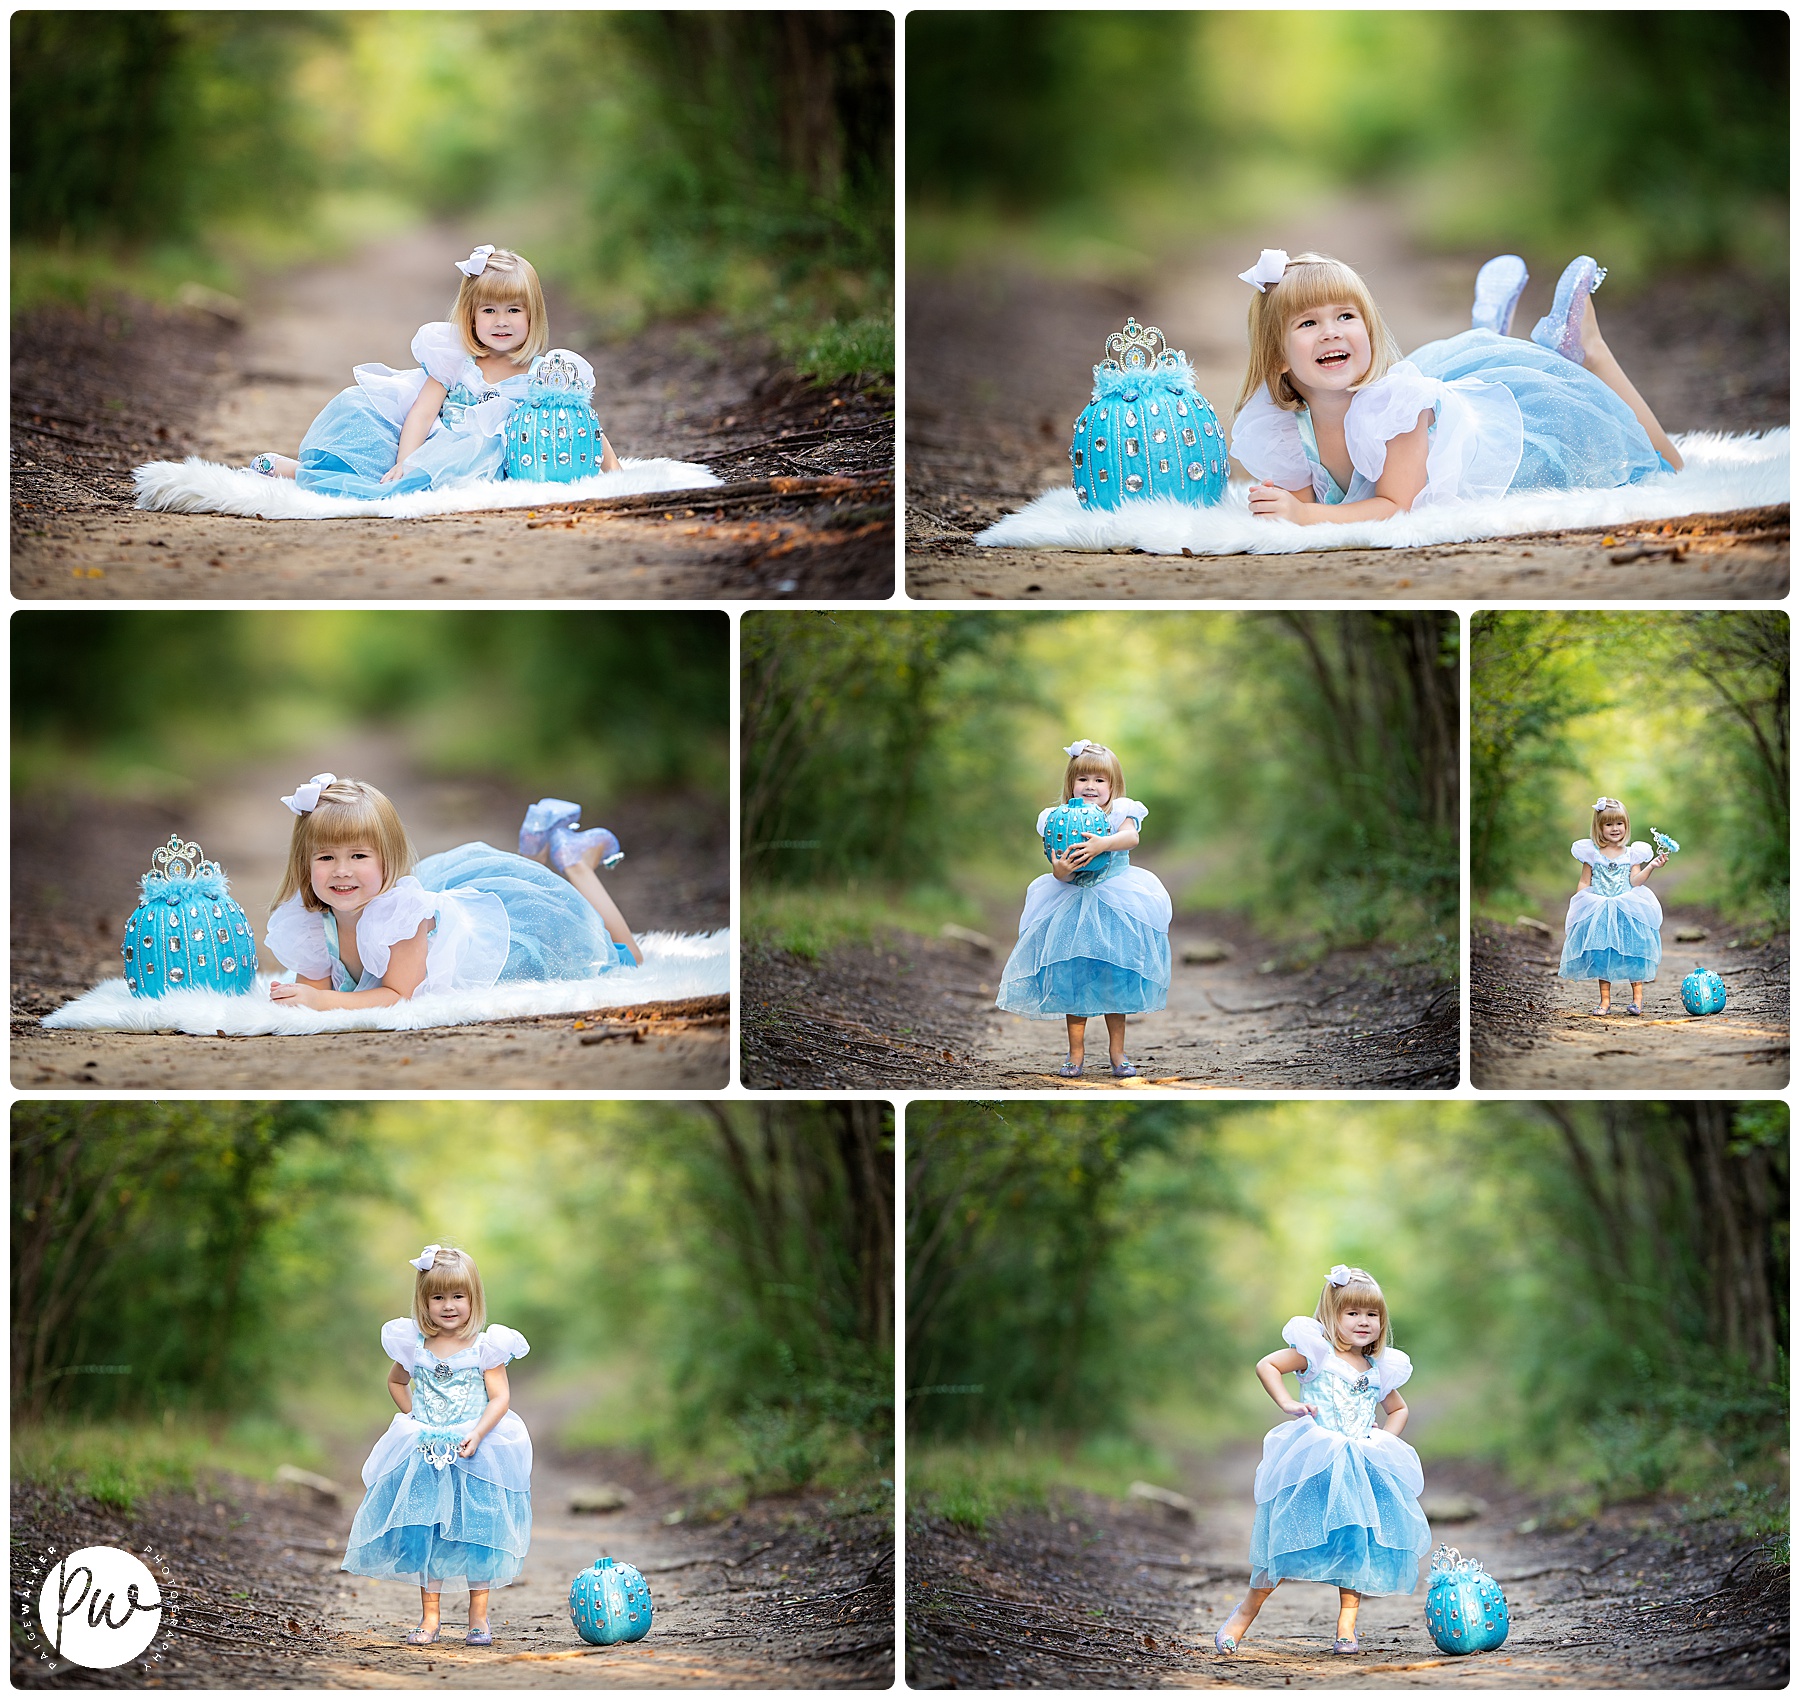 little girl dressed as Cinderella with her blue pumpkin